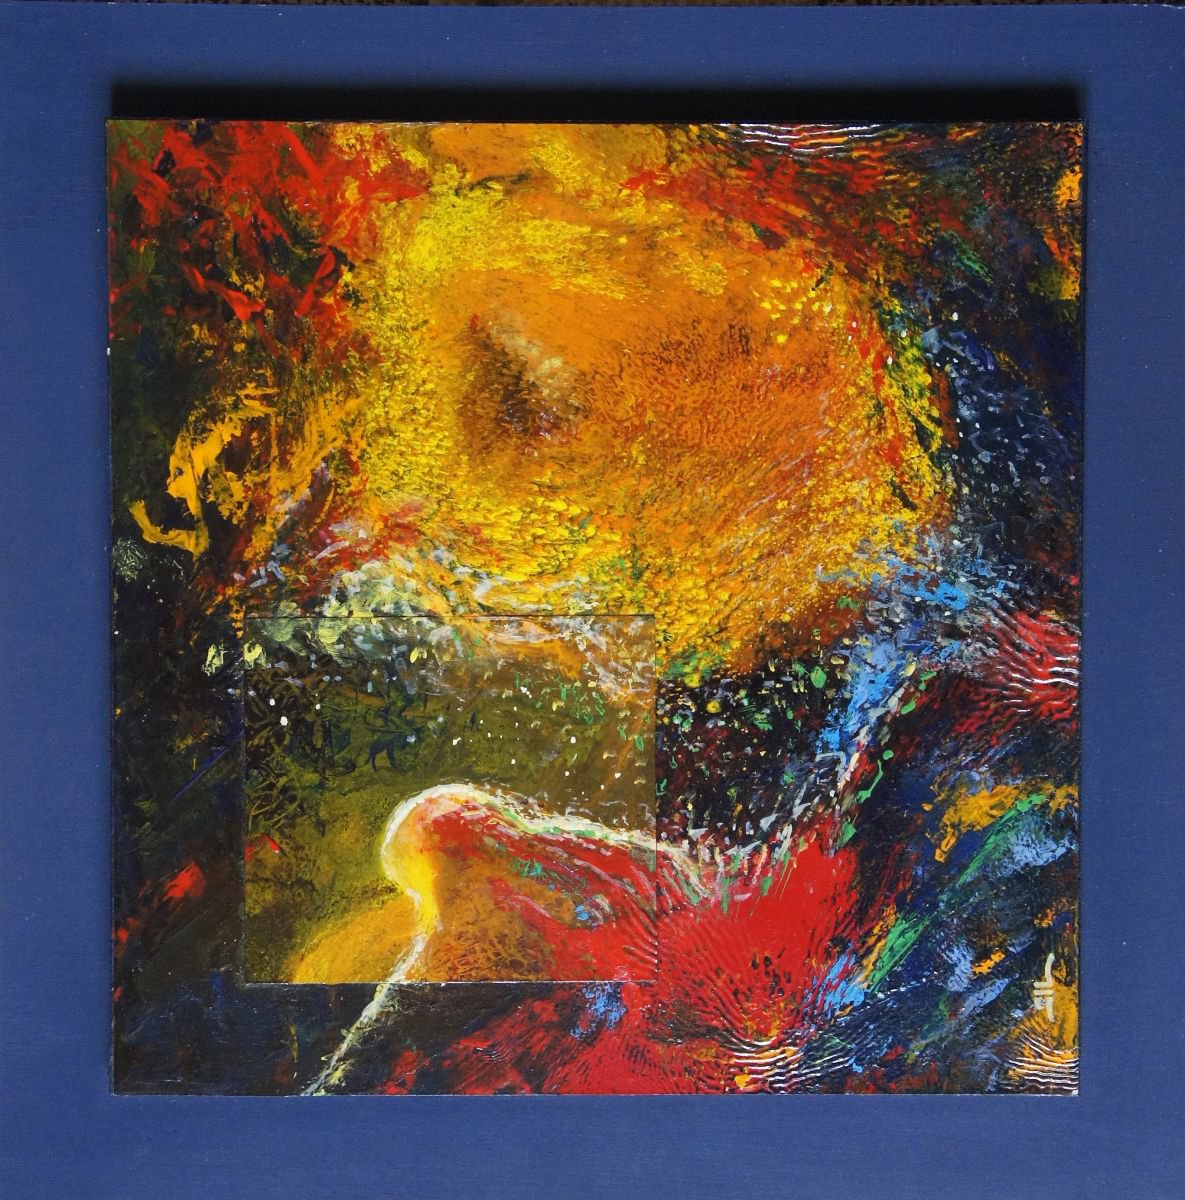 ICARE (acrylic & oil paintings framed 30x30) by Jean-Luc Lacroix